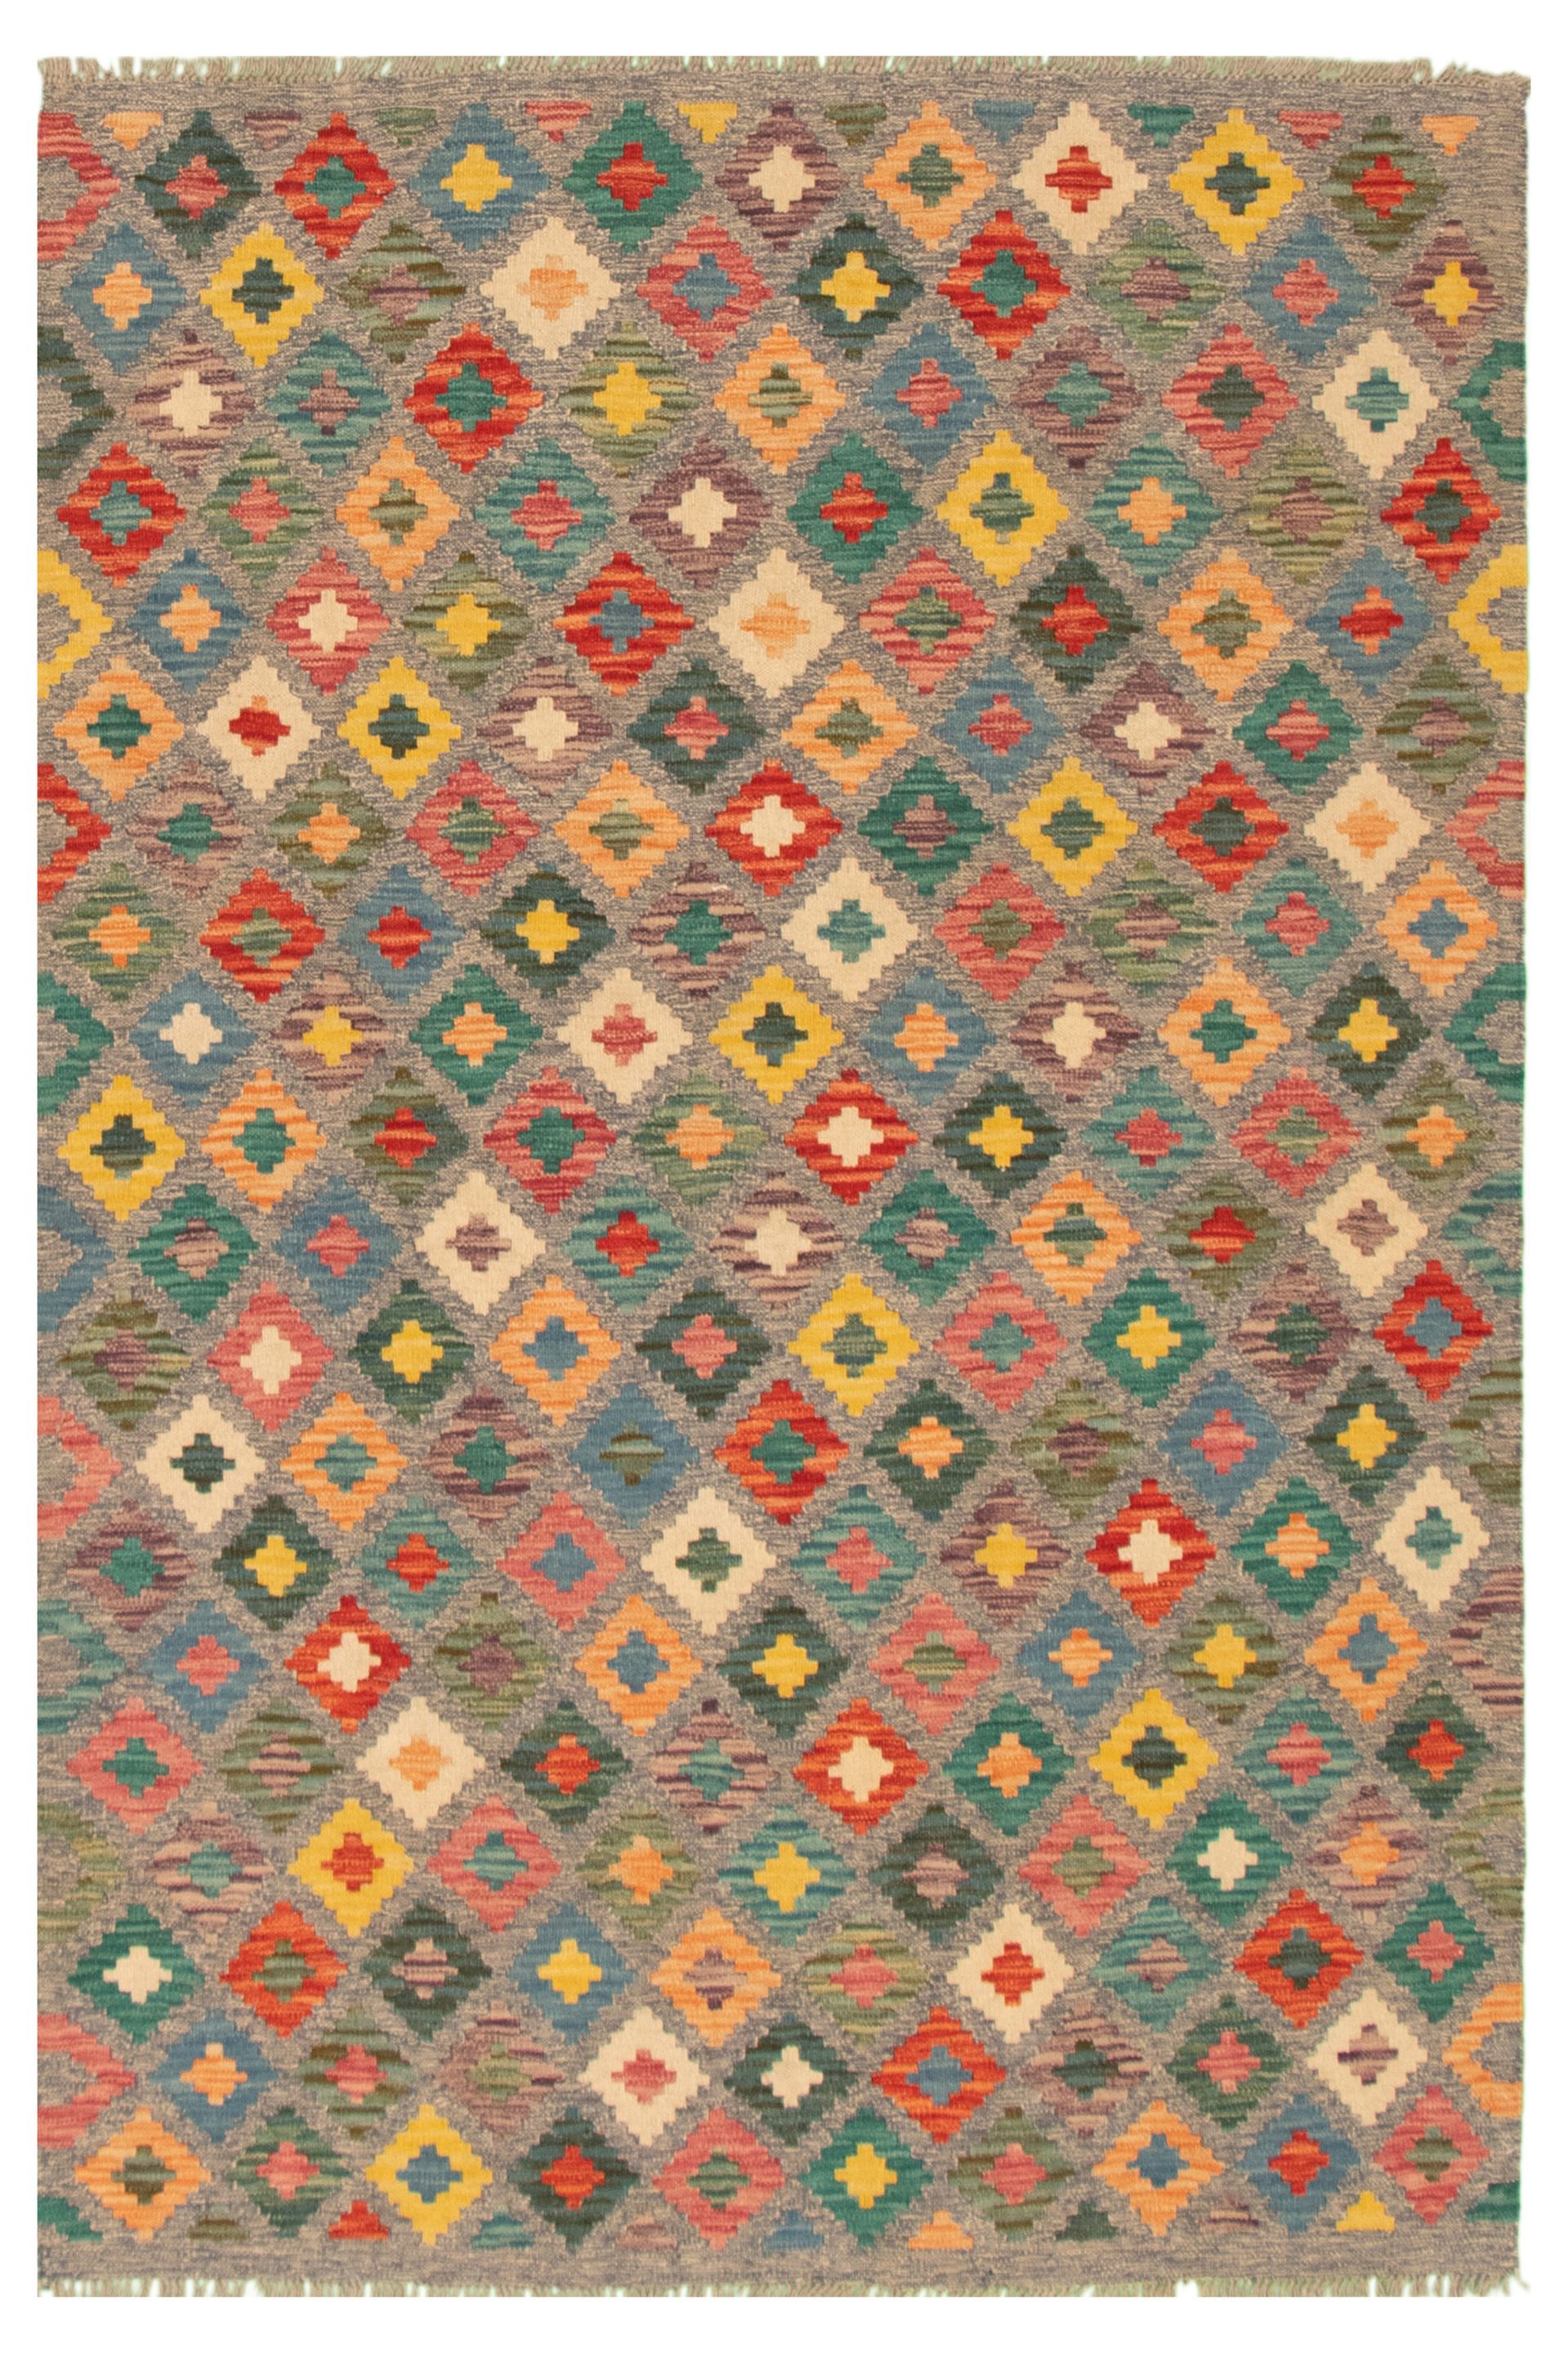 Hand woven Bold and Colorful  Multi Color Wool Kilim 5'0" x 6'6"  Size: 5'0" x 6'6"  